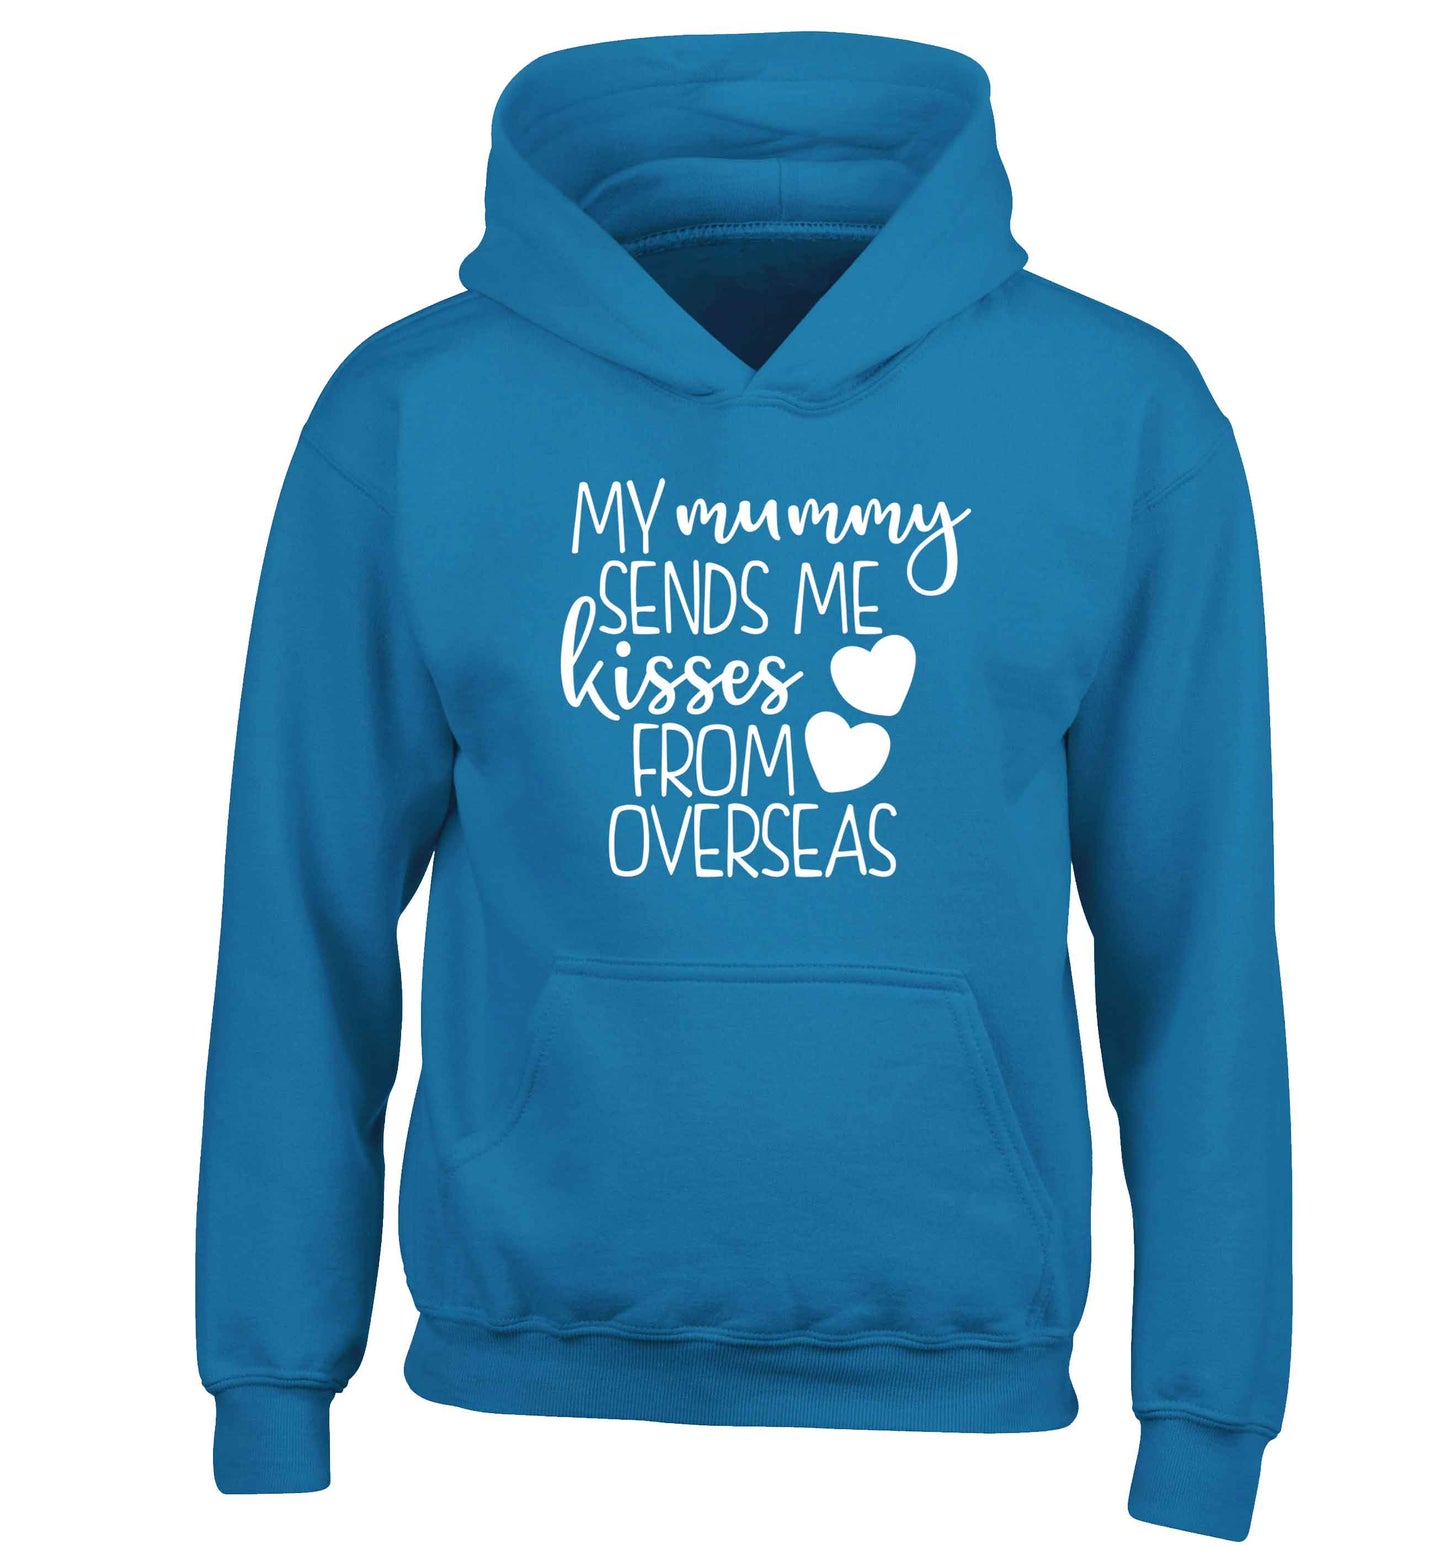 My mummy sends me kisses from overseas children's blue hoodie 12-13 Years